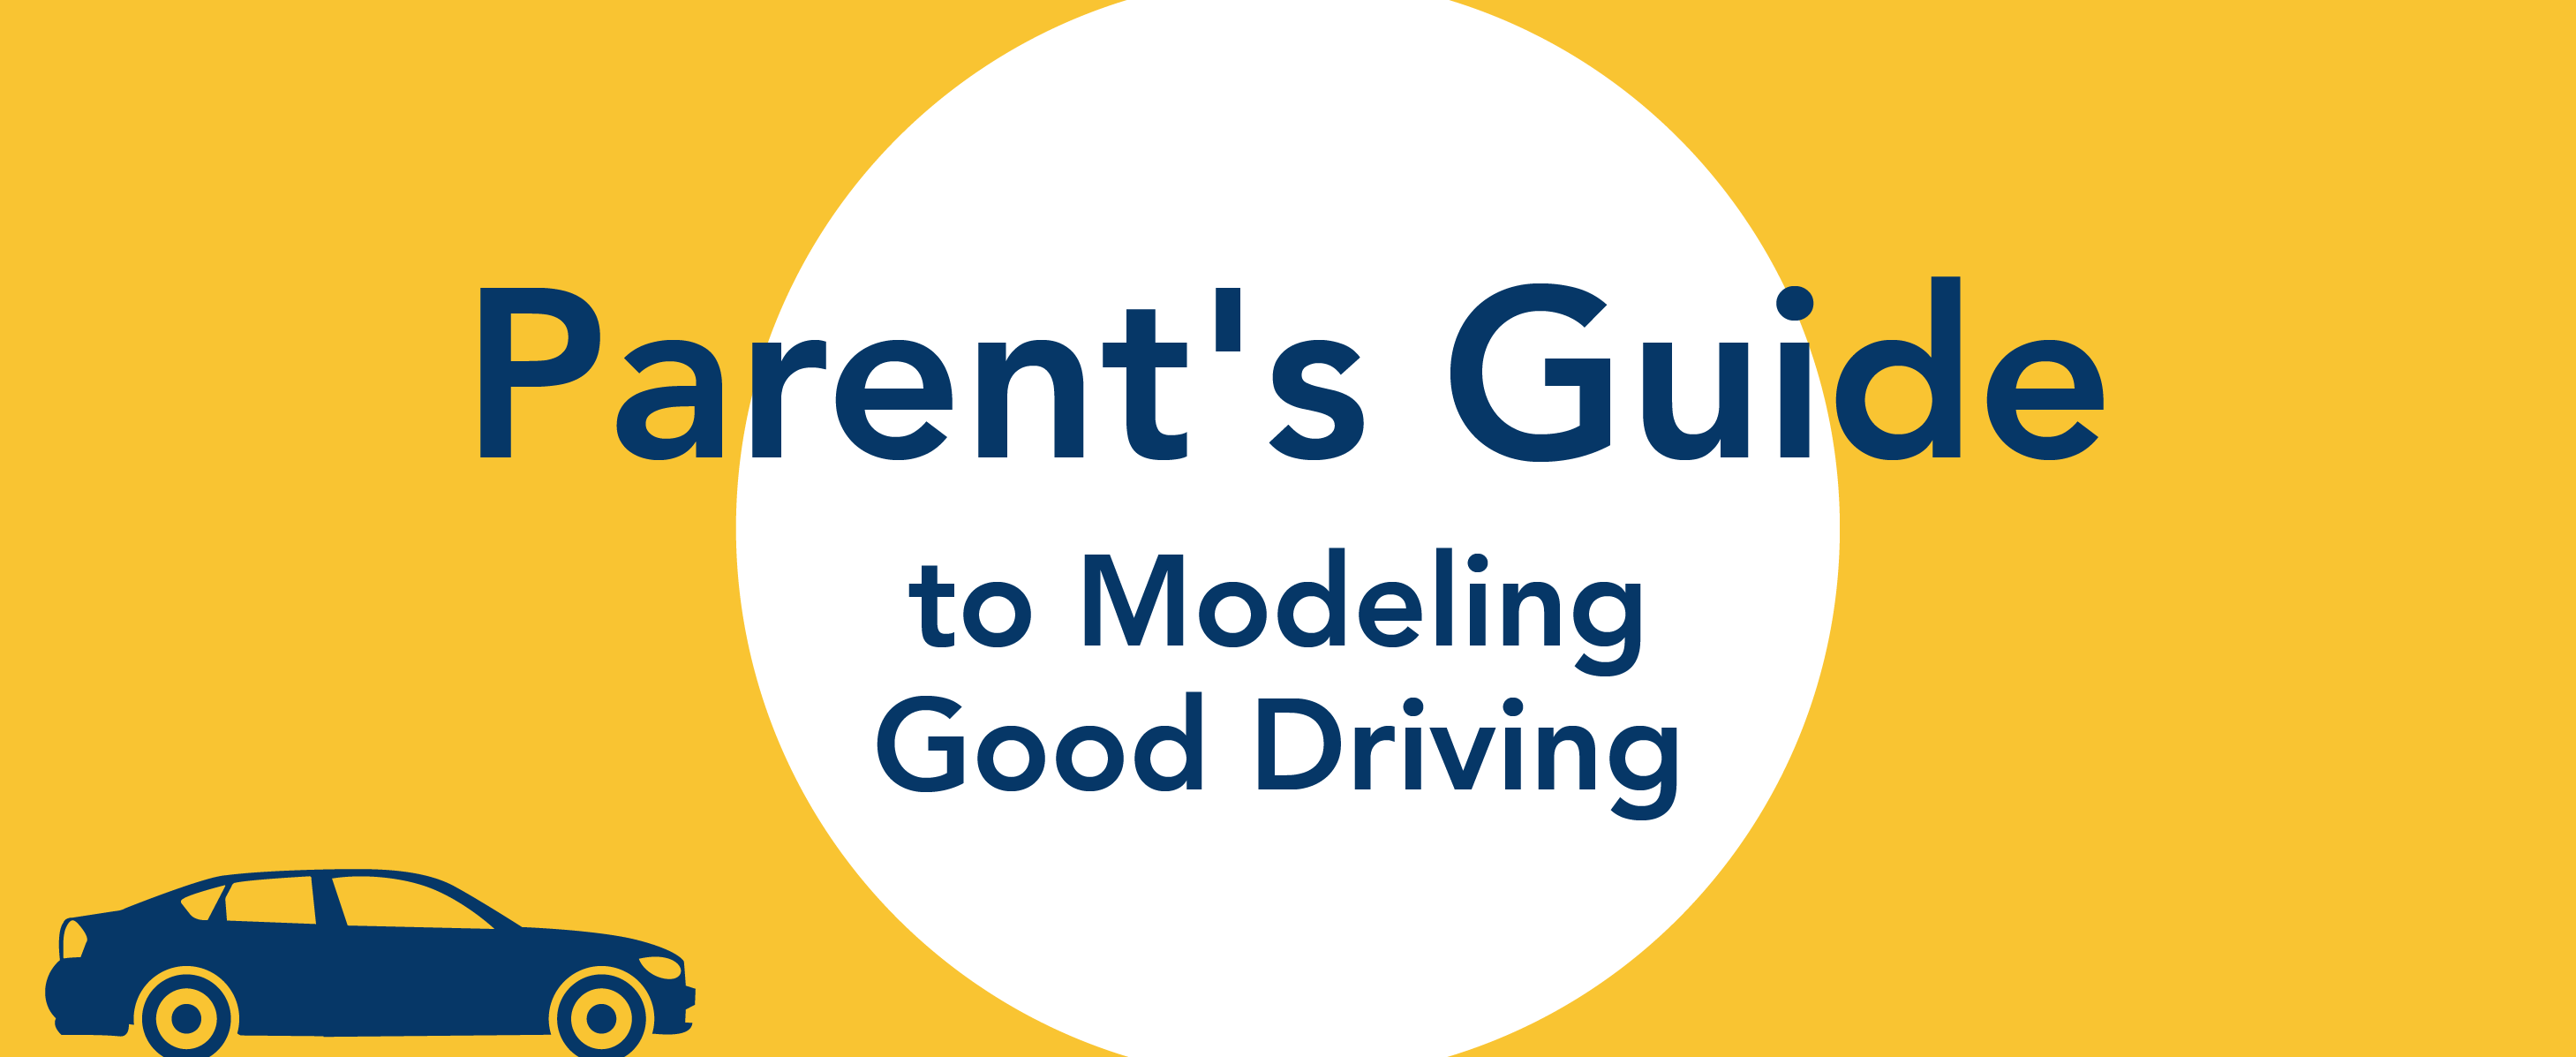 Parent's Guide to modeling good driving.